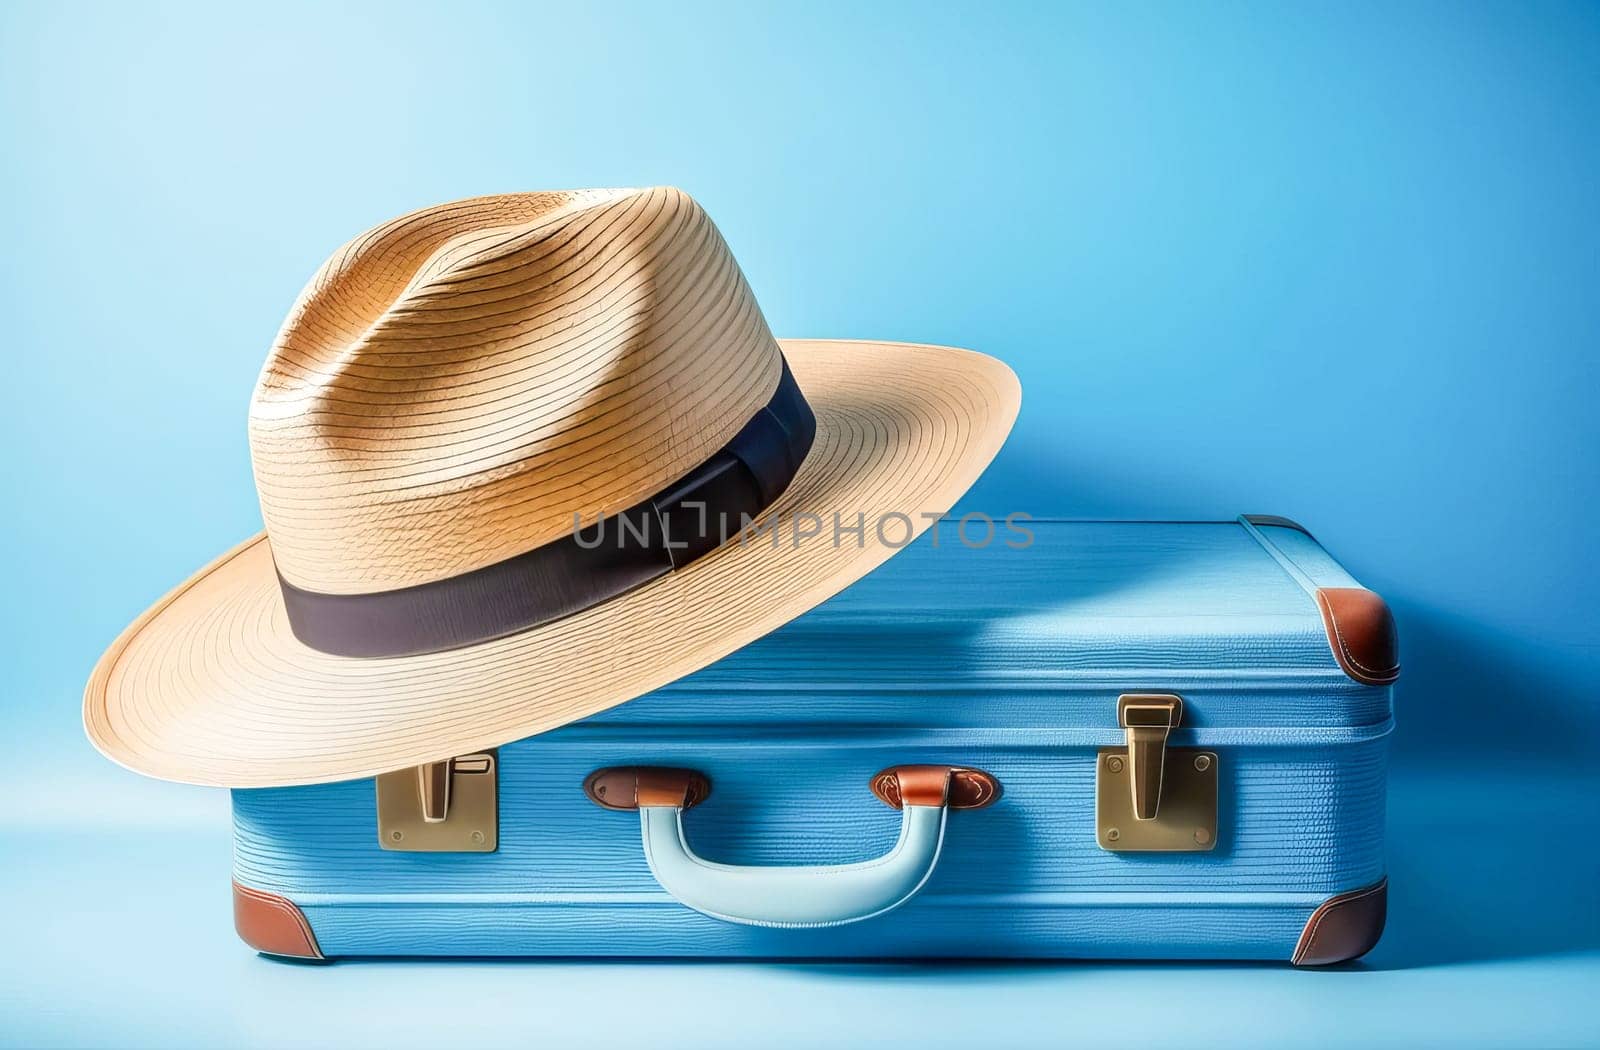 Blue retro suitcase and elegant straw hat on soft blue textured background in natural light, vacation concept.